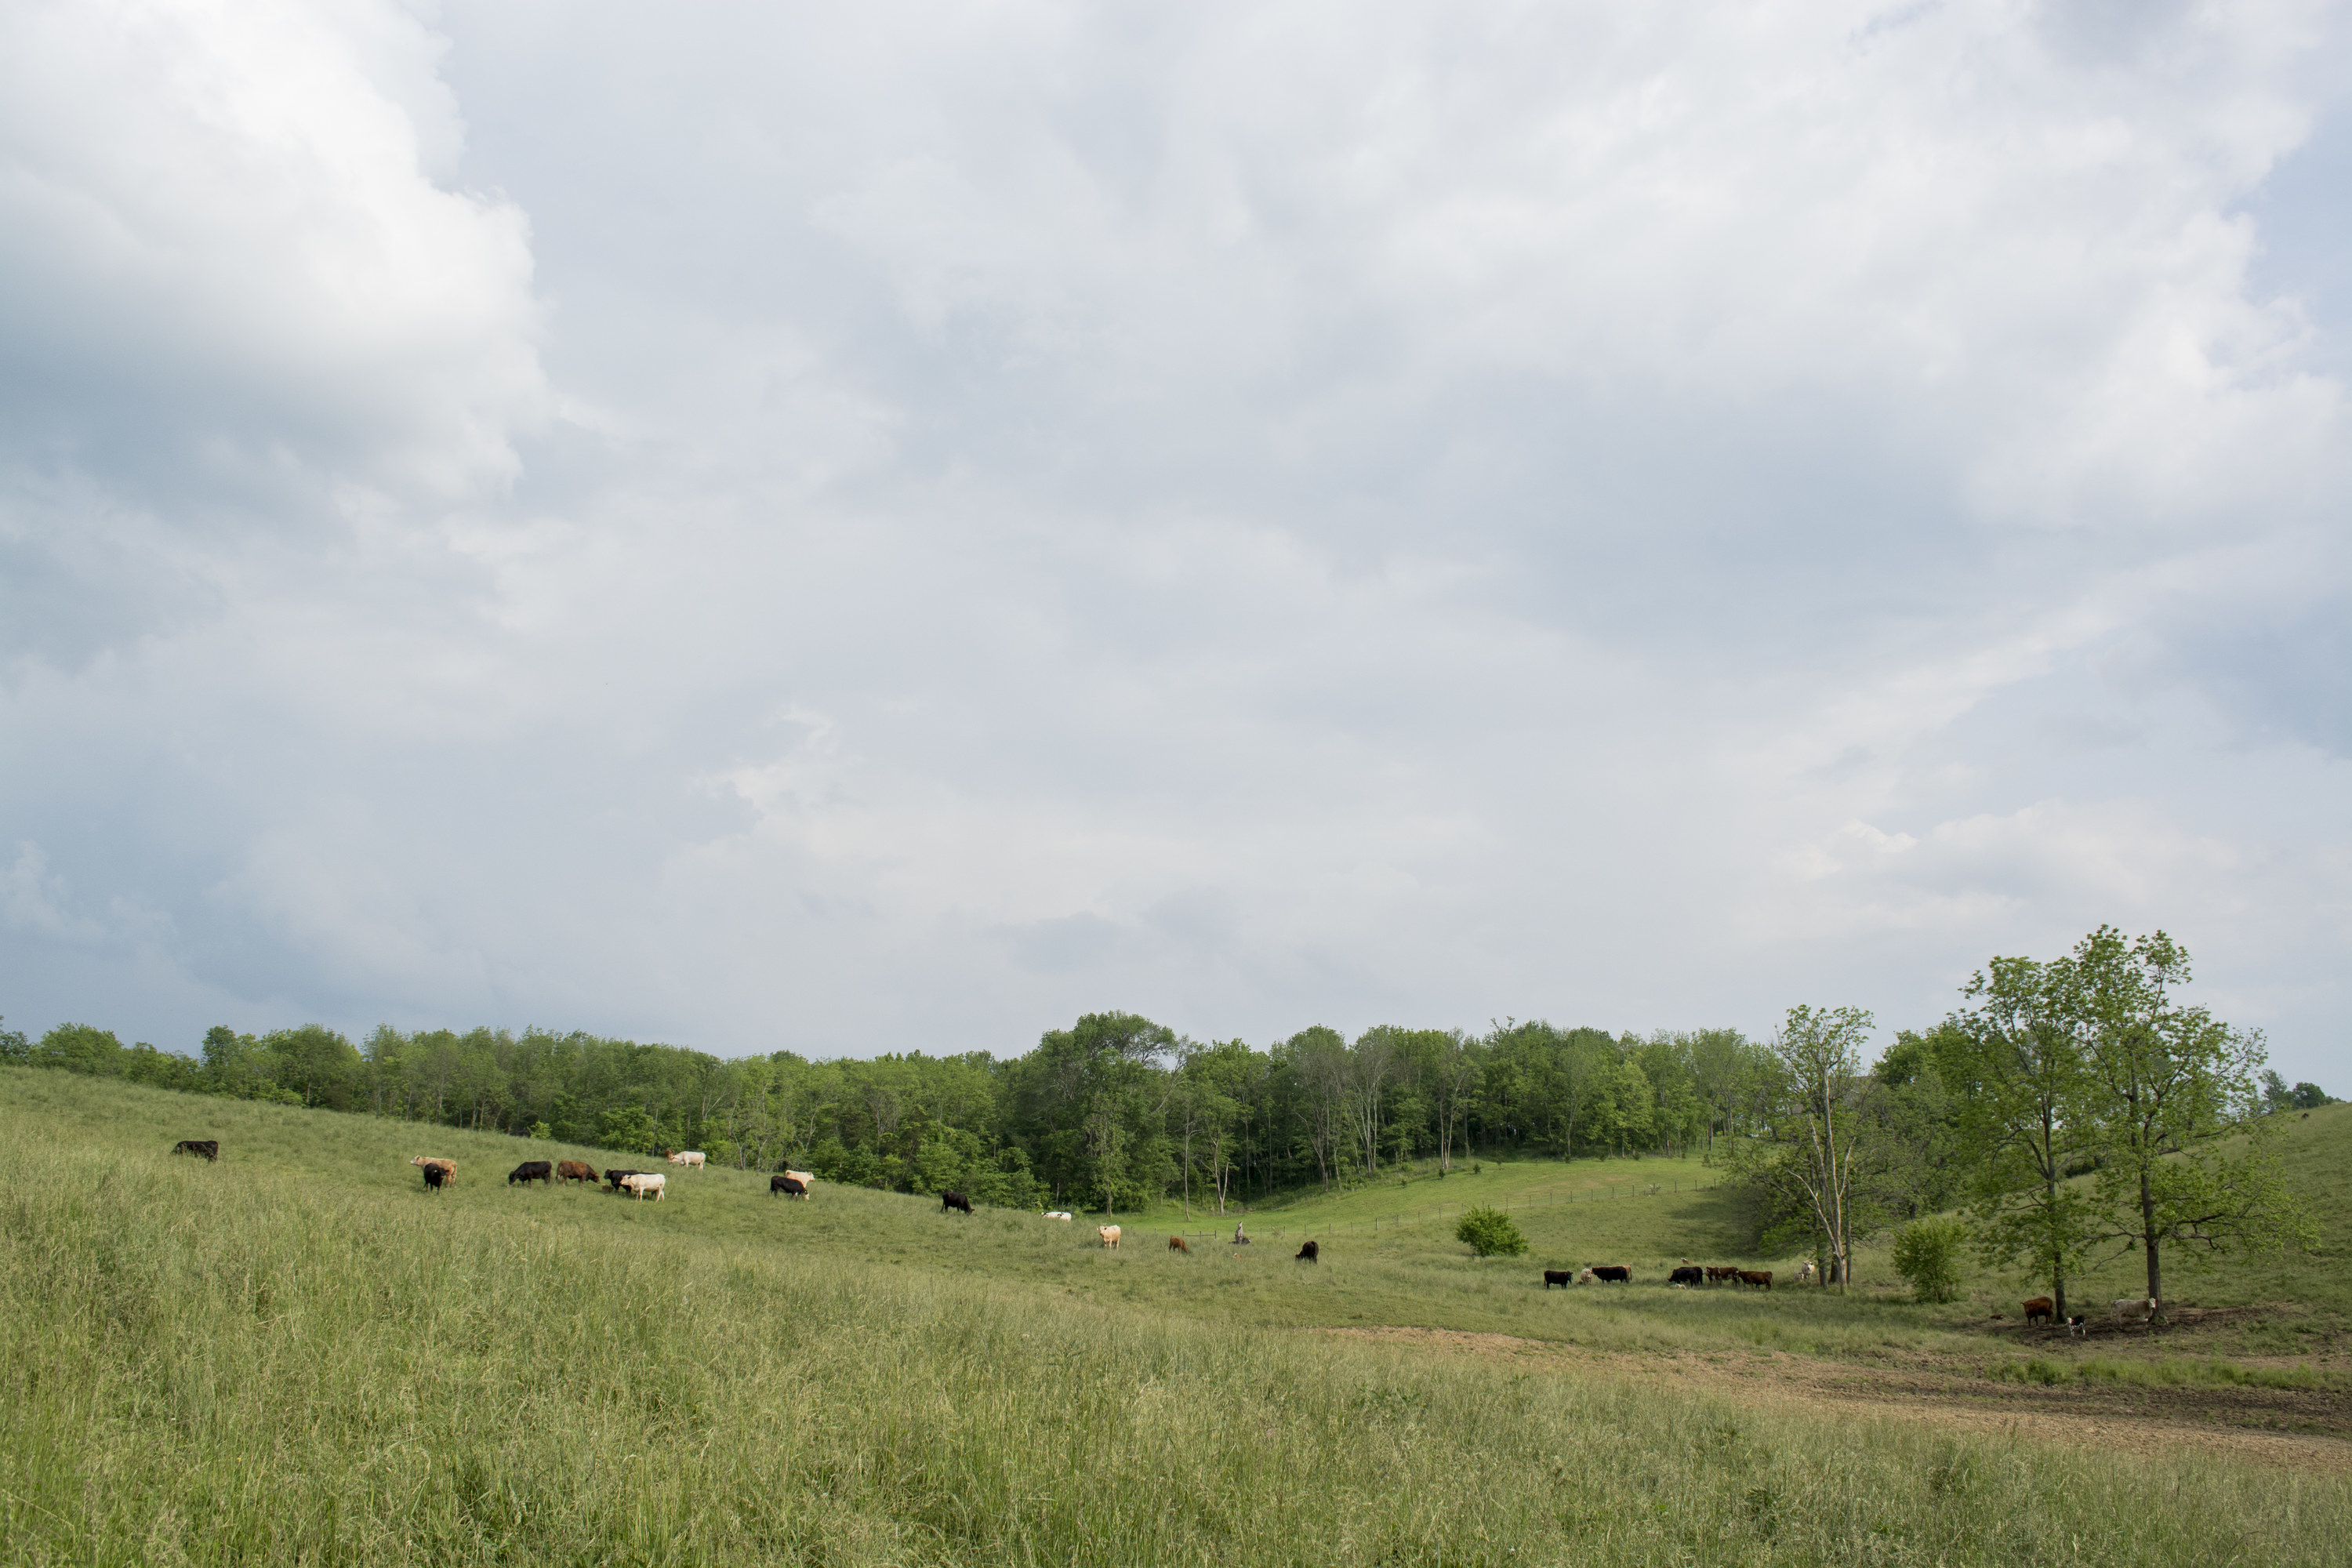 Beef cattle in a hilly pasture in Appalachia with cloudy sky